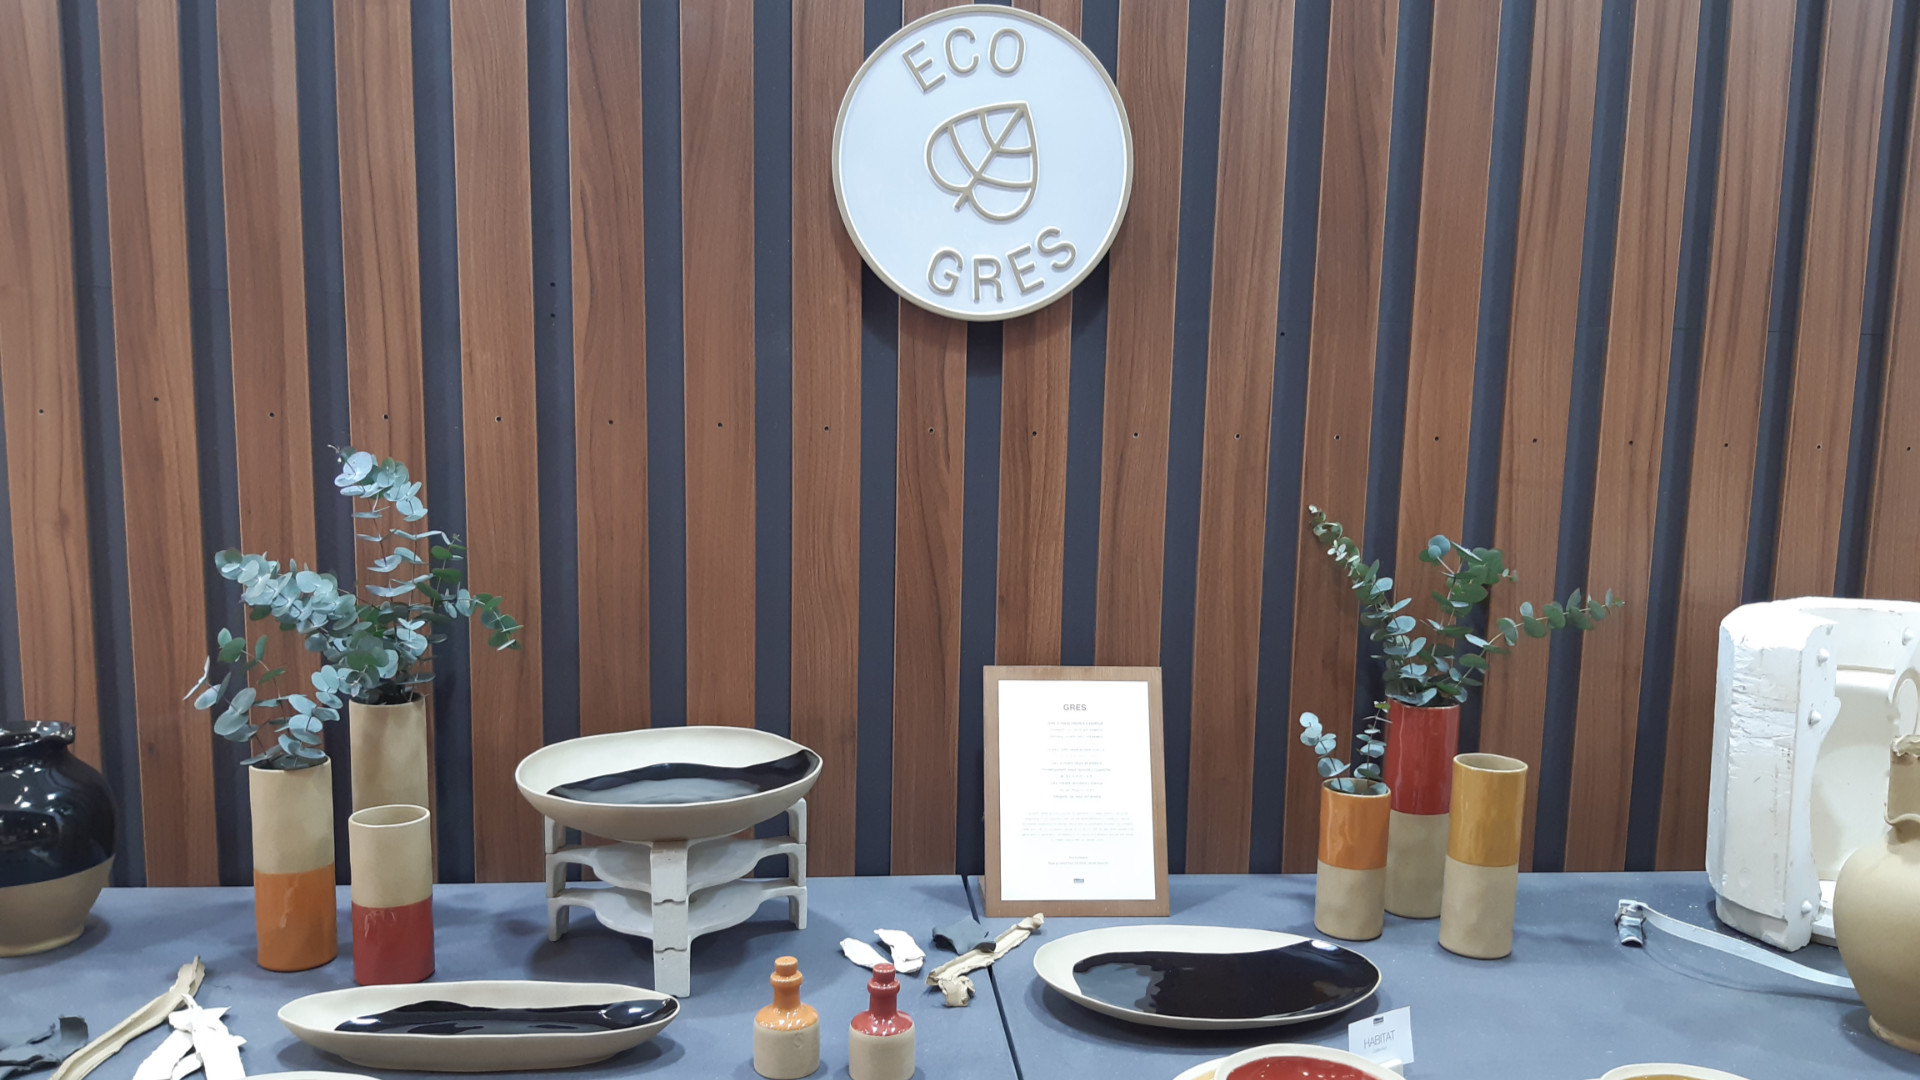 All collections with the Ecogres® guarantee label from Grestel are made from recycled materials.  Photo: Beate Schraml